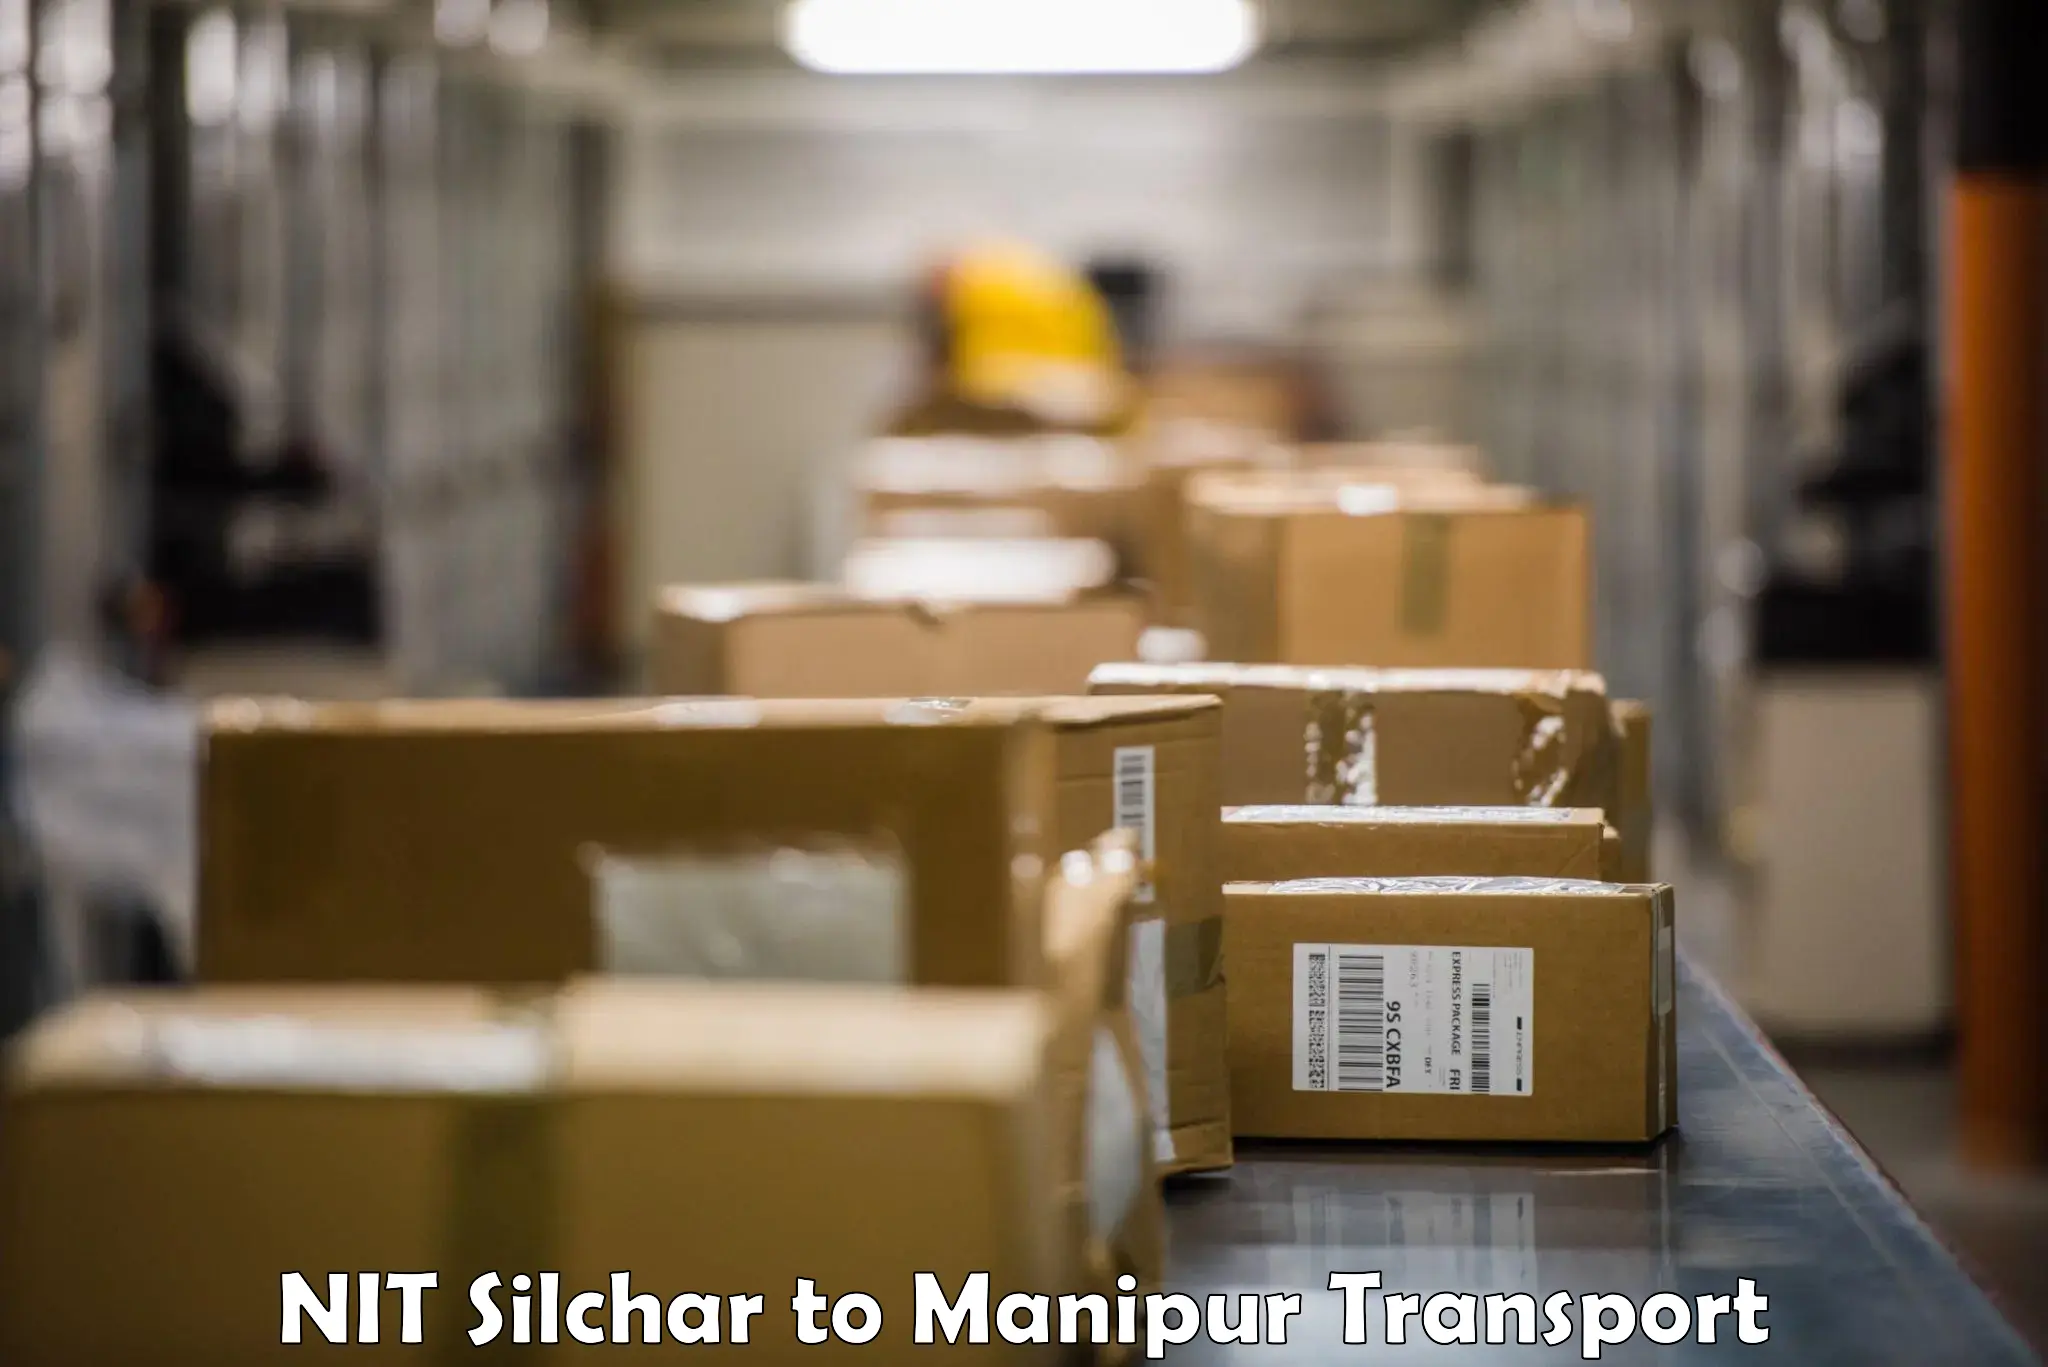 Container transport service NIT Silchar to Imphal